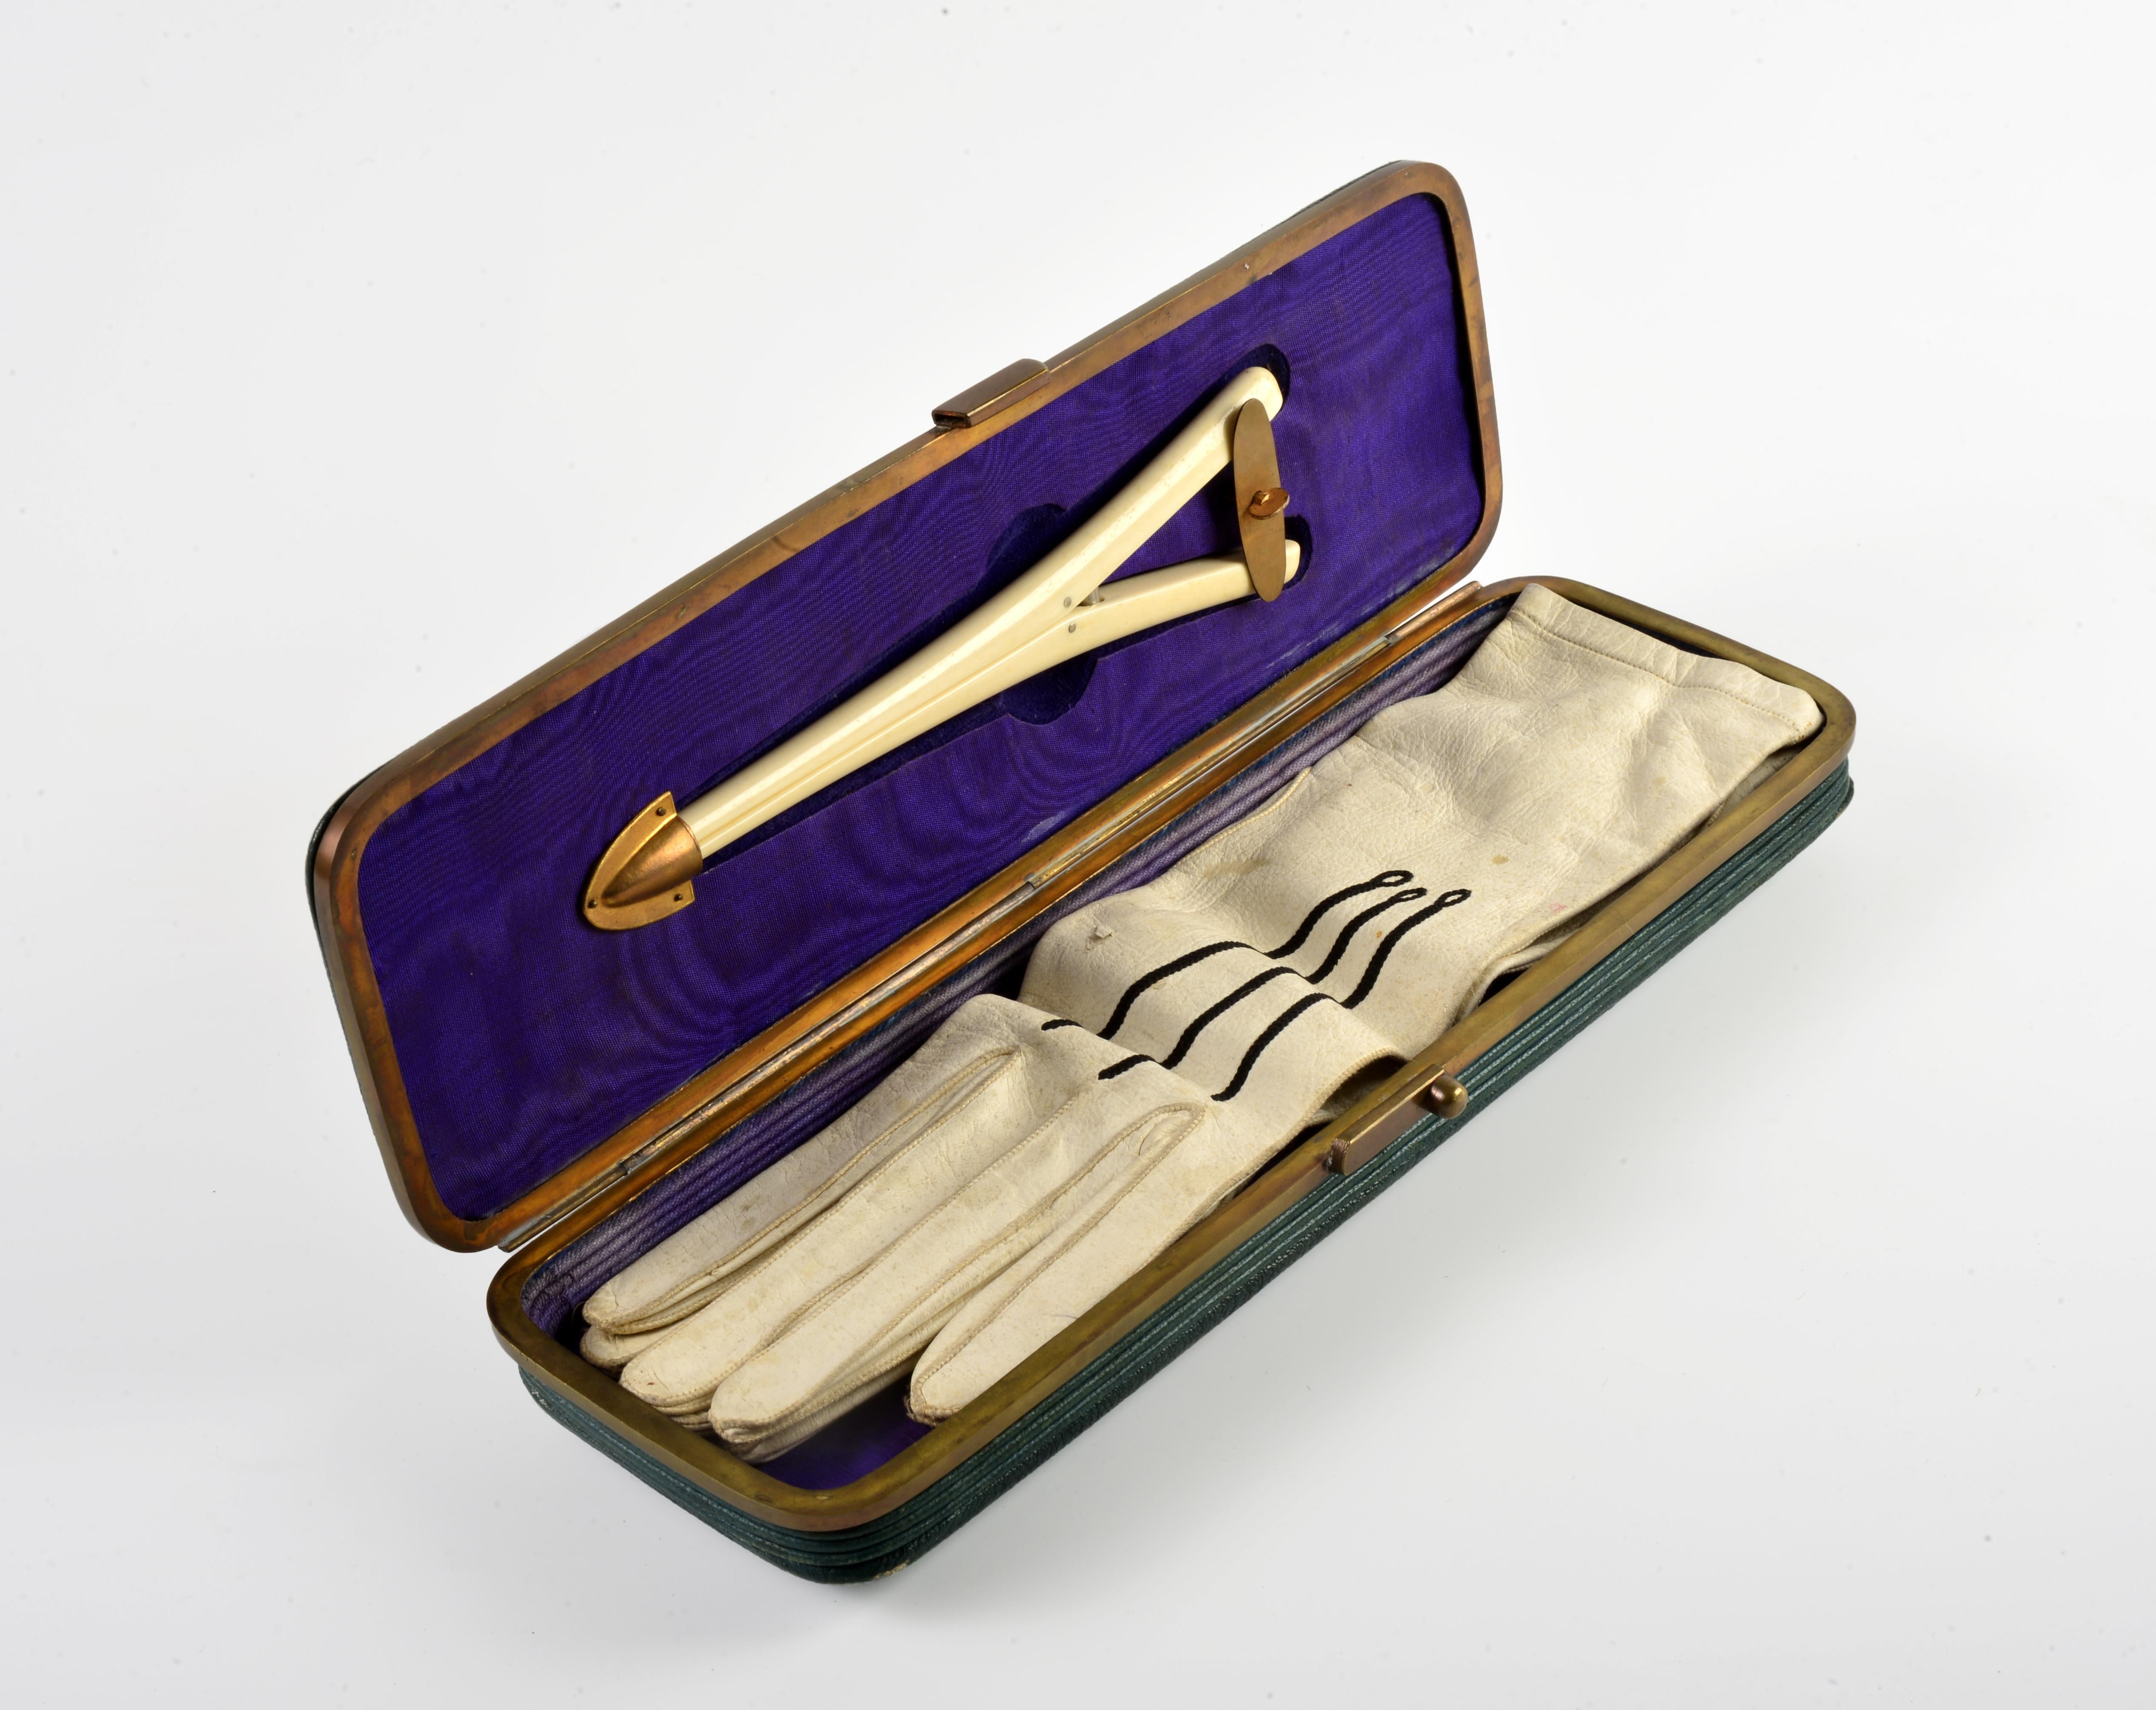 Late 19th century French glove box or case, probably made by Louis Ducat, successor to the Smal firm. This firm was located on the Place du Palais Royal and supplied the imperial family under Napoleon III. It is a bellows case that could hold